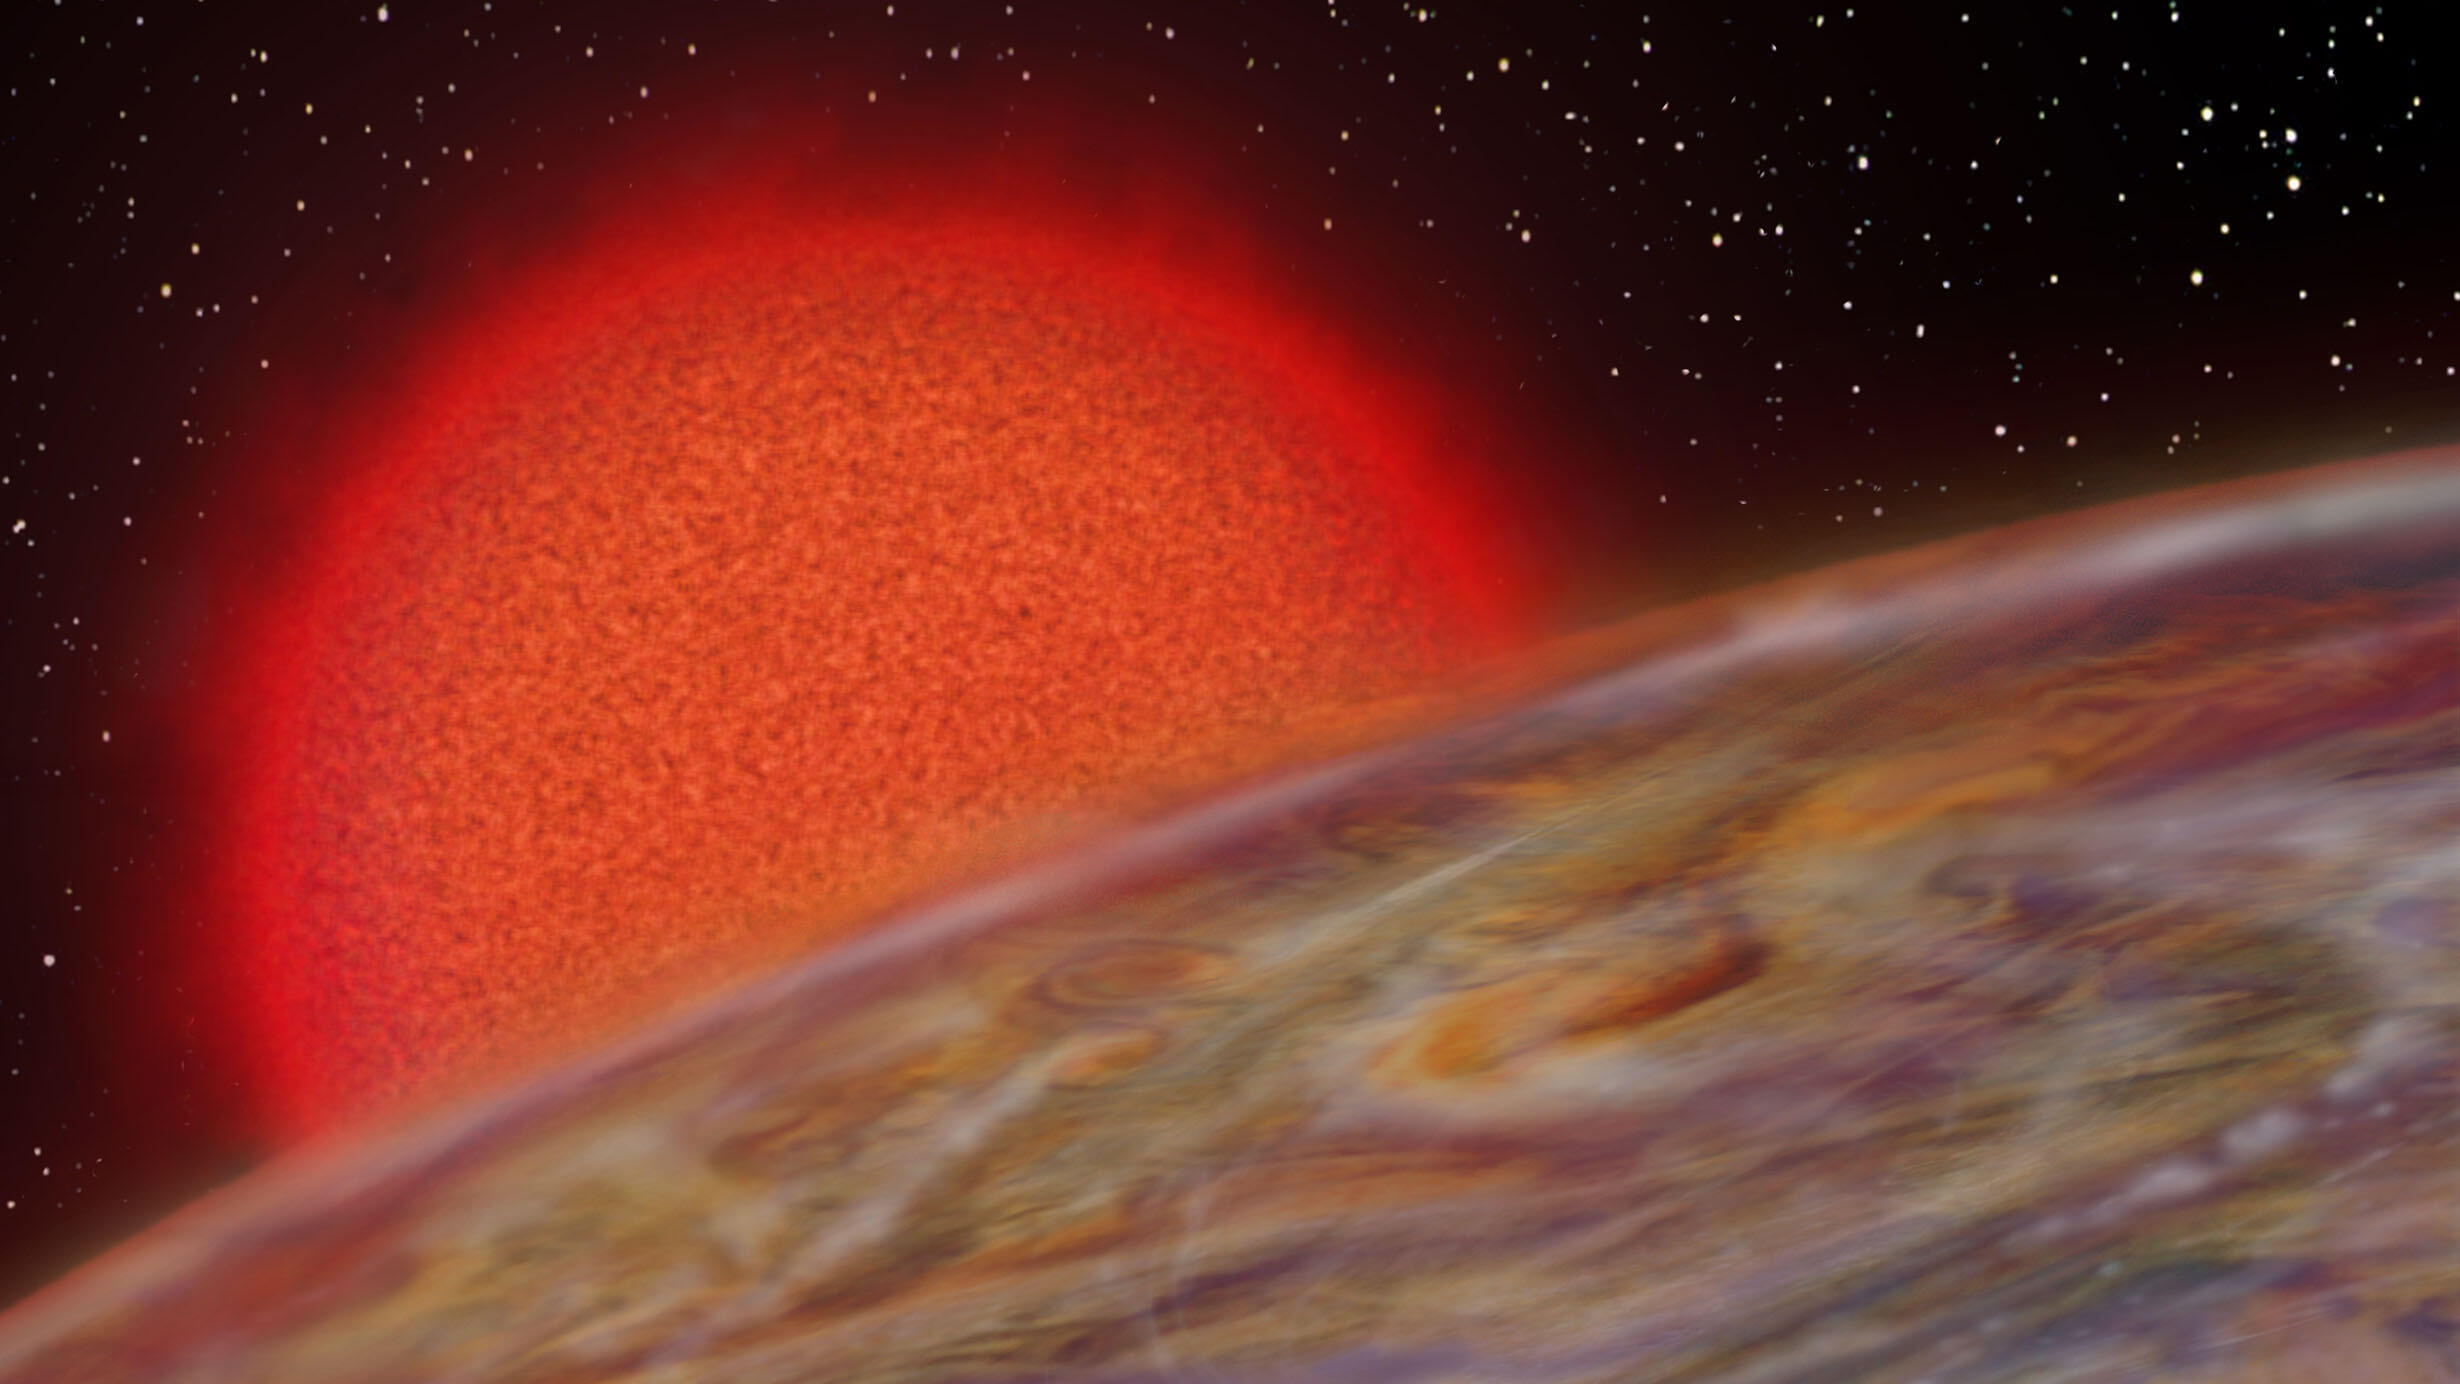 Gas giant planet, K2-132b, with a 9 day orbit, expands as its star evolves into a red giant.